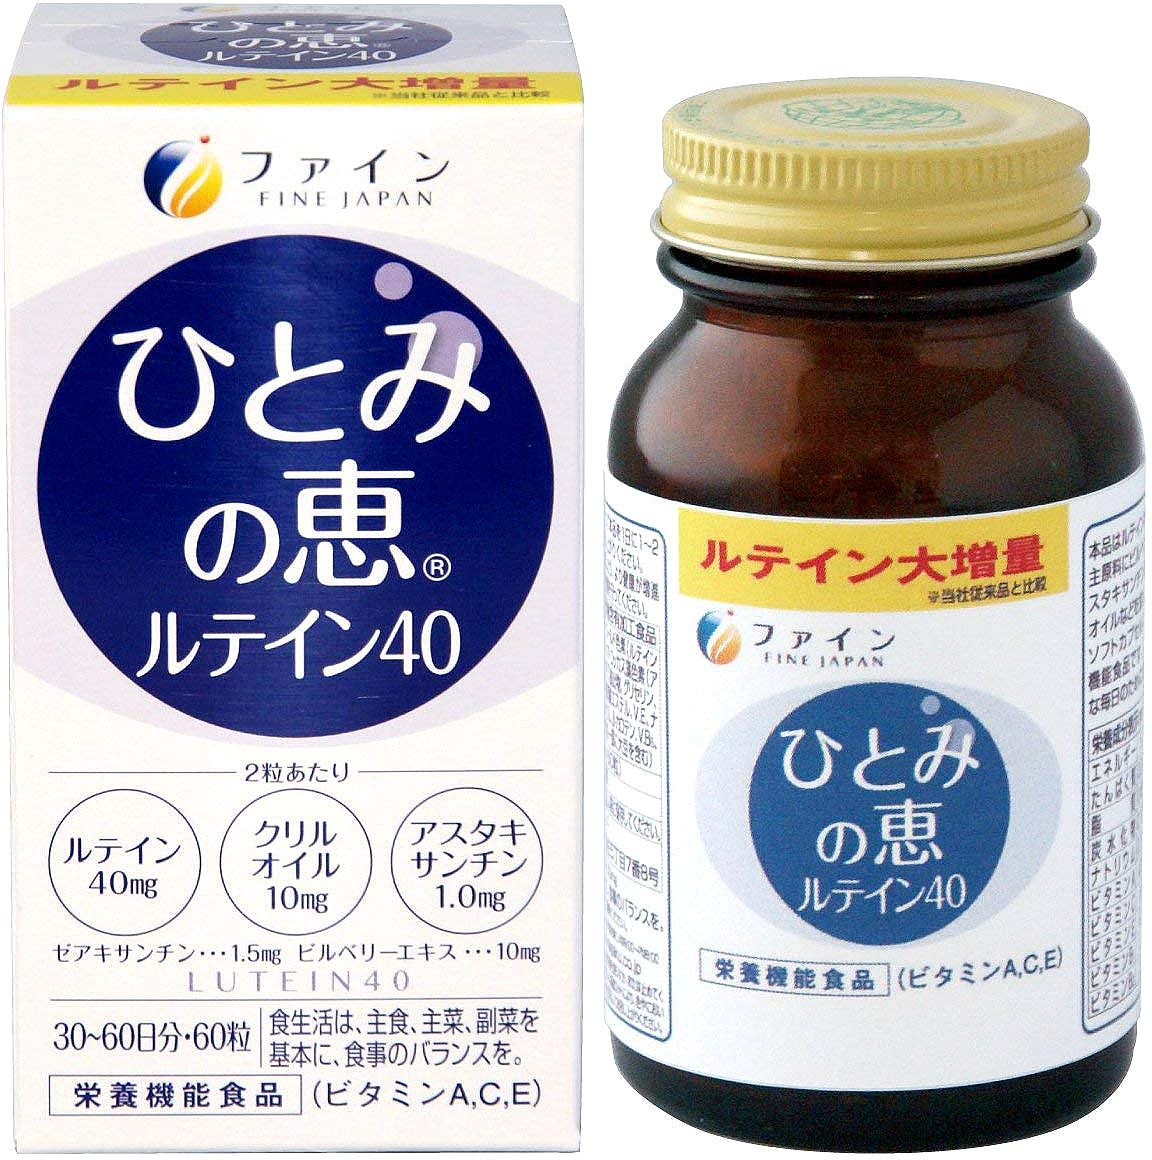 Hitomi No Megumi - Vitamins for maintaining visual acuity, with high lutein content 40 mg, complex for 30 days